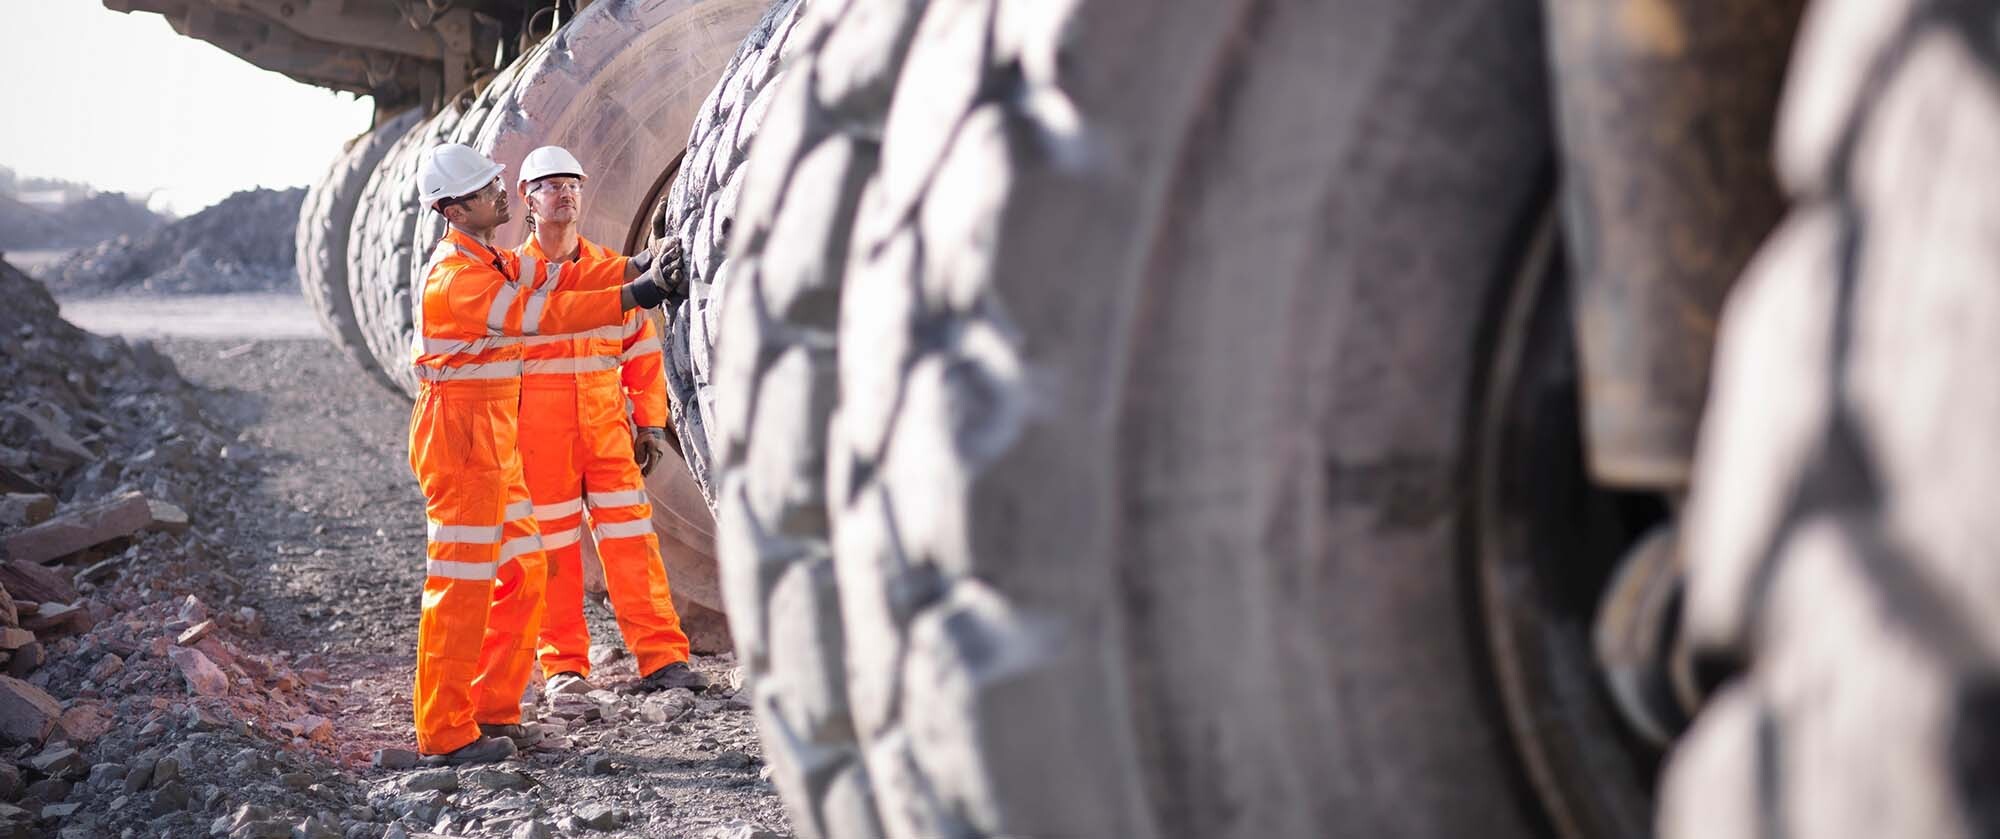 Our workwear offers the highest protection for your employees and meets stringent industry safety standards.